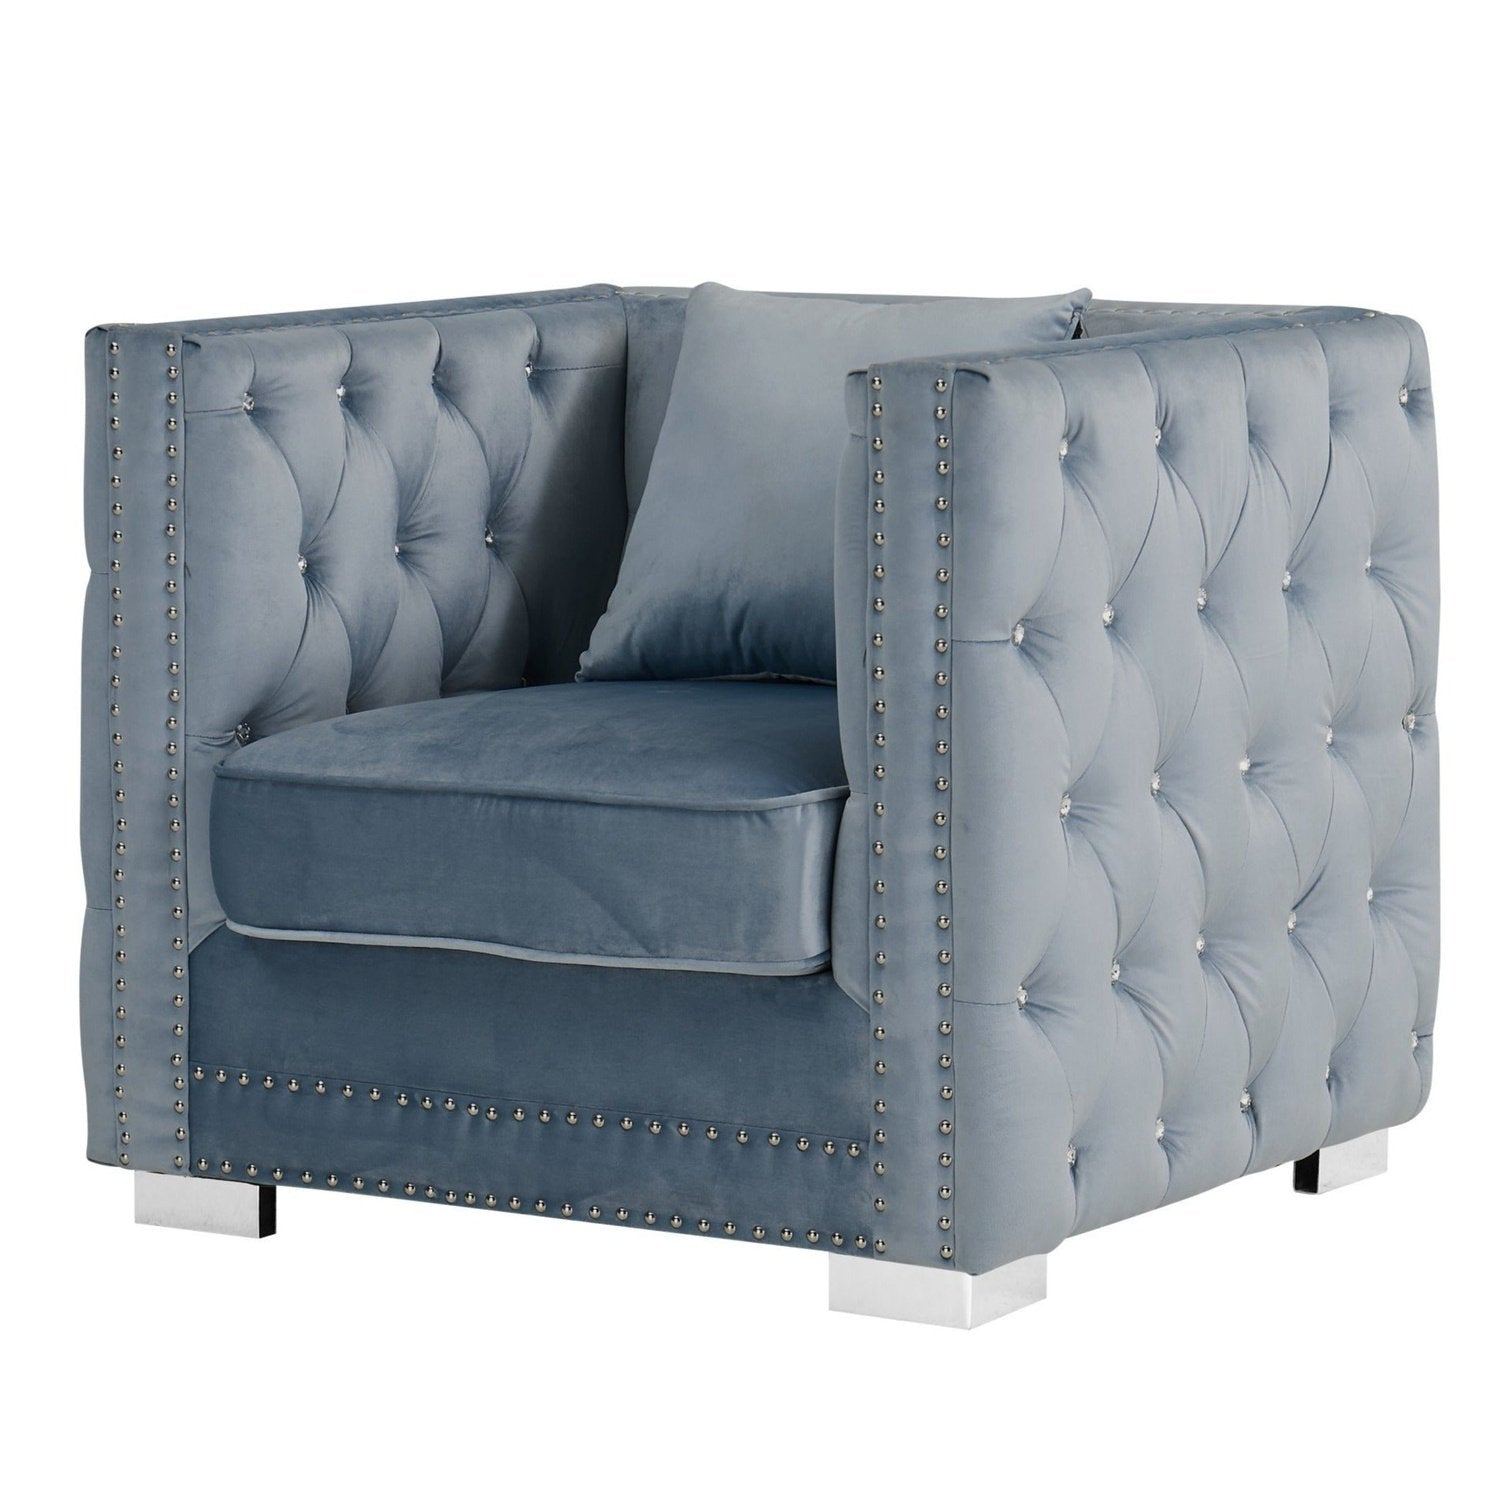 Iconic Home Christophe Club Chair – Design Tufted Arm Velvet Home Chic Shelter